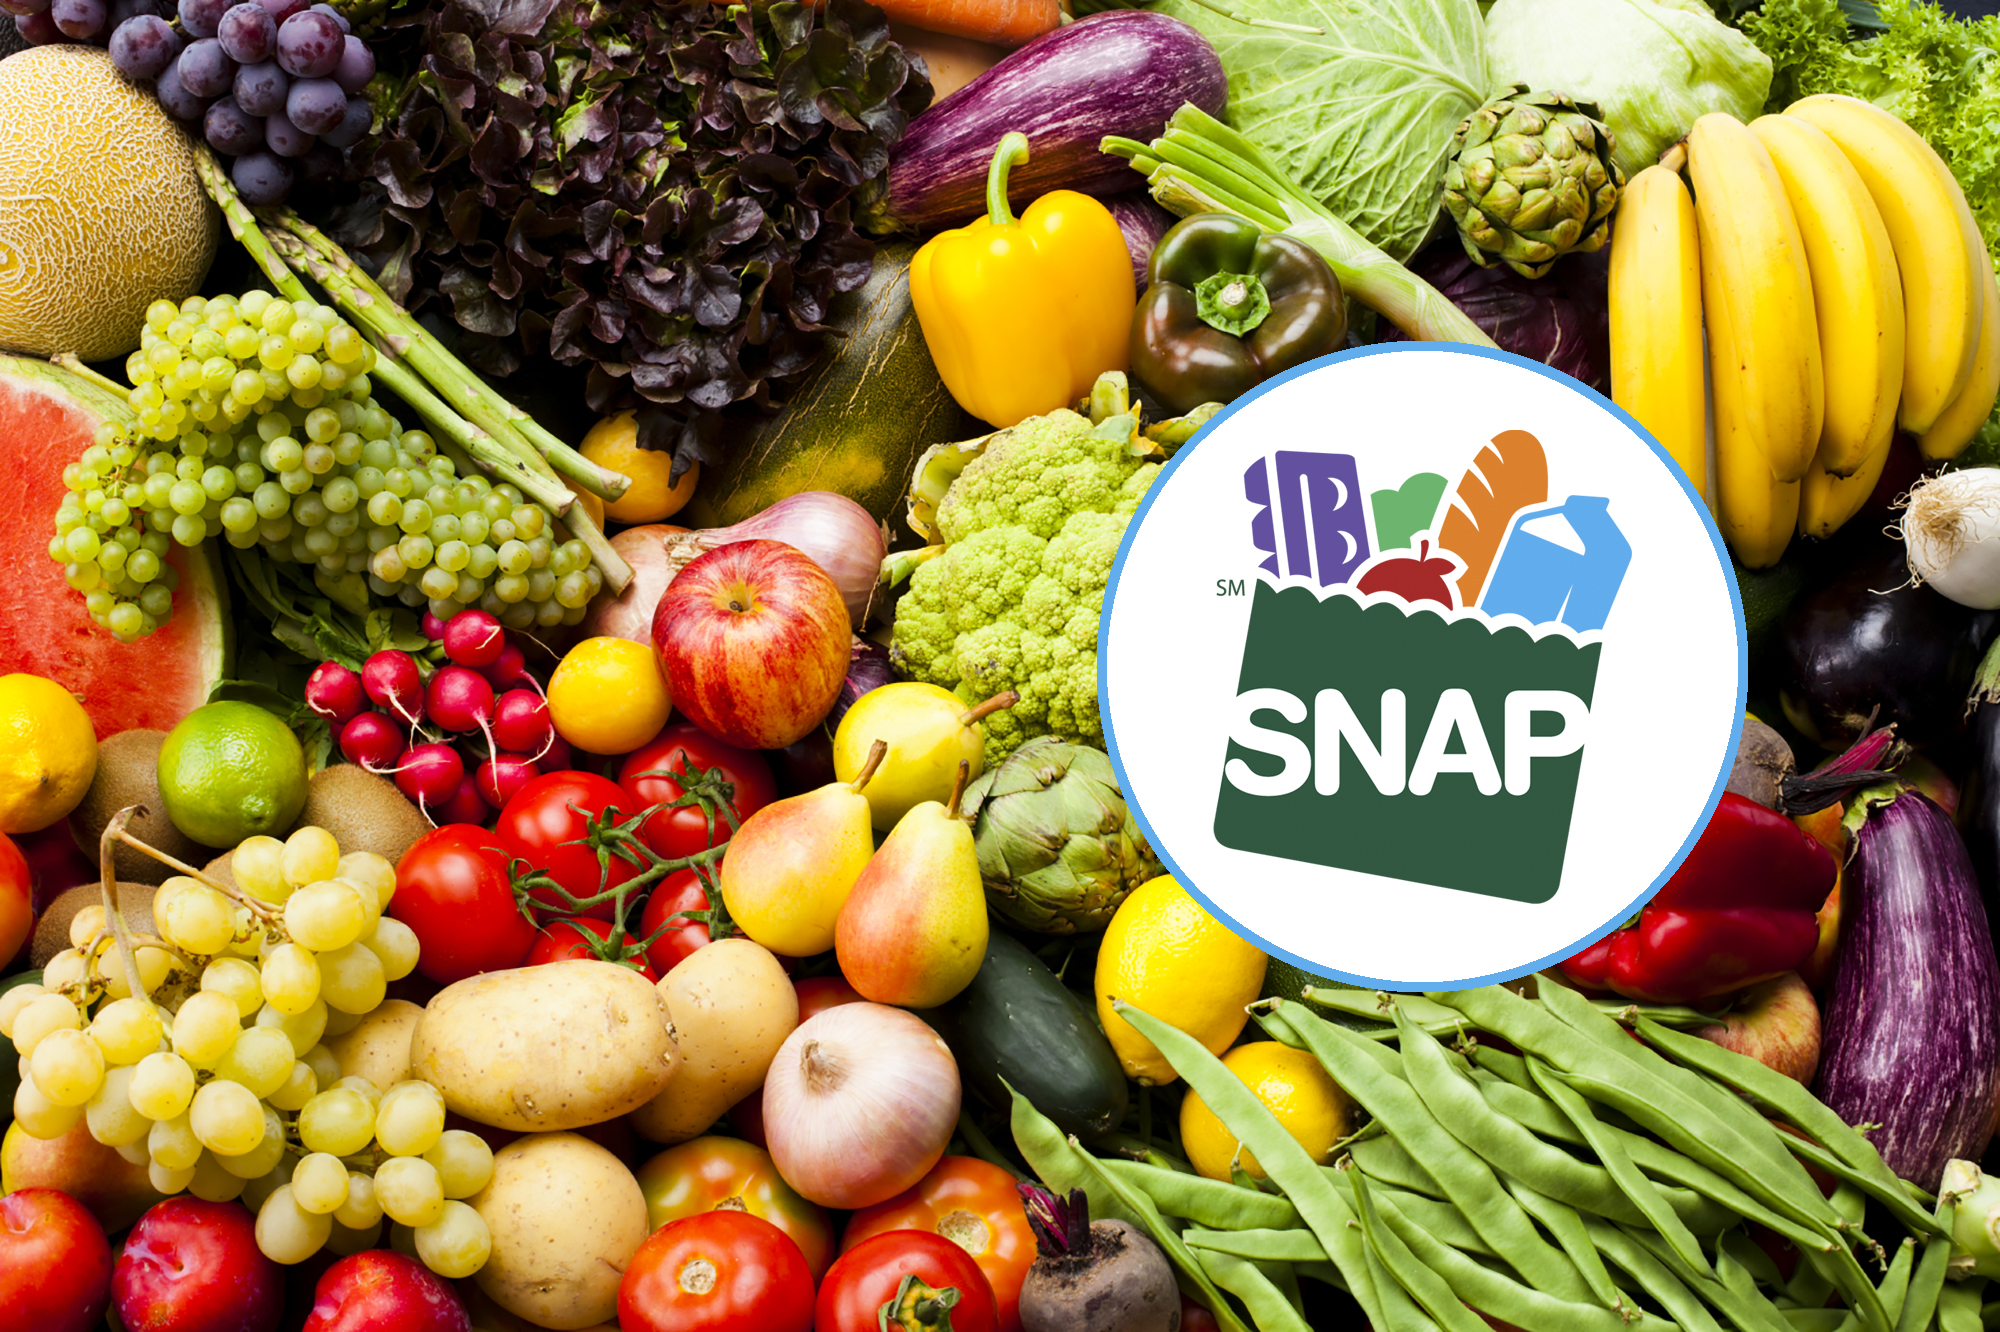 Several lawmakers aim to reduce SNAP benefits or restrict some provisions due to the program’s increasing cost.